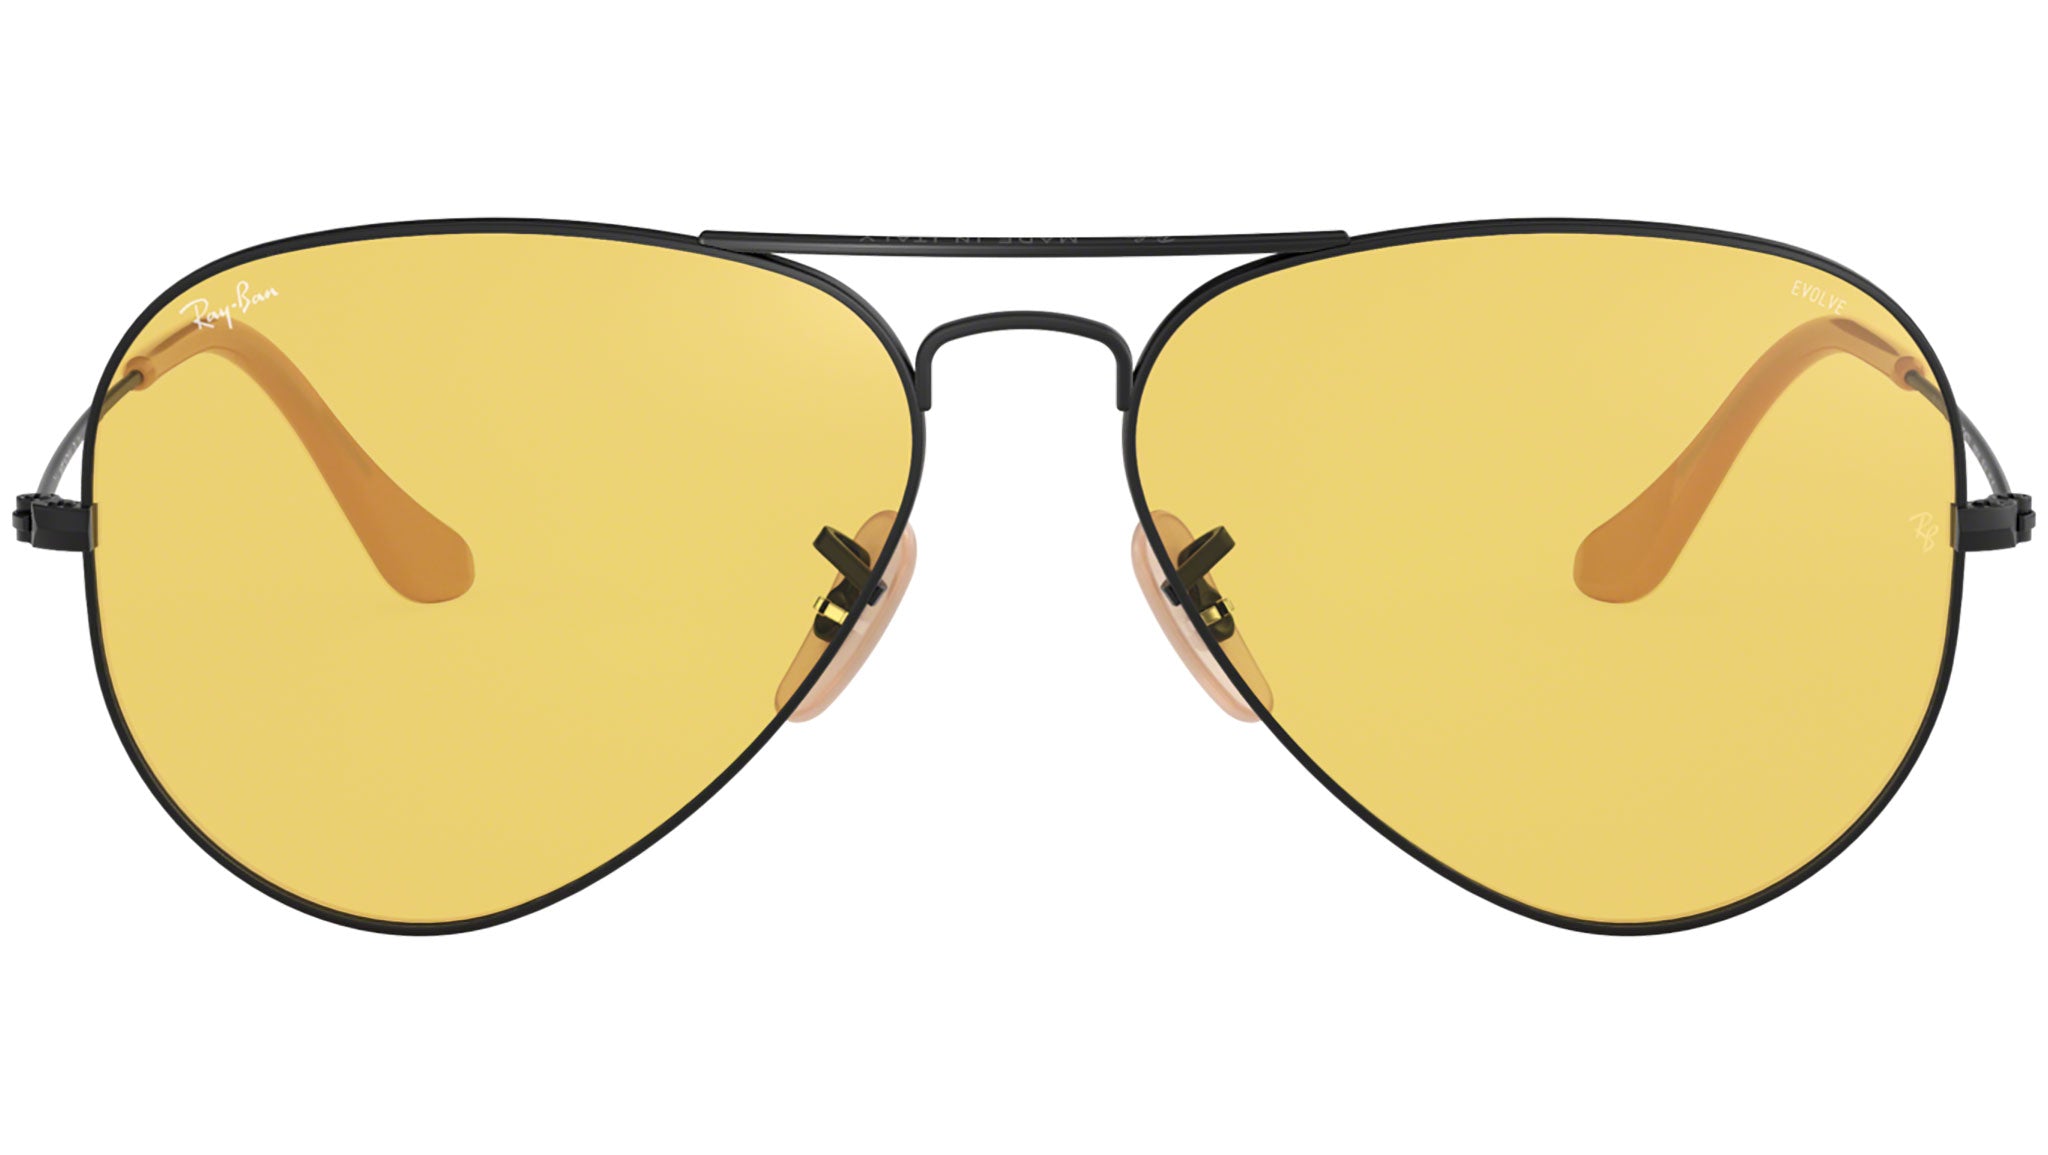 Aviator Washed Evolve RB3025 black and yellow